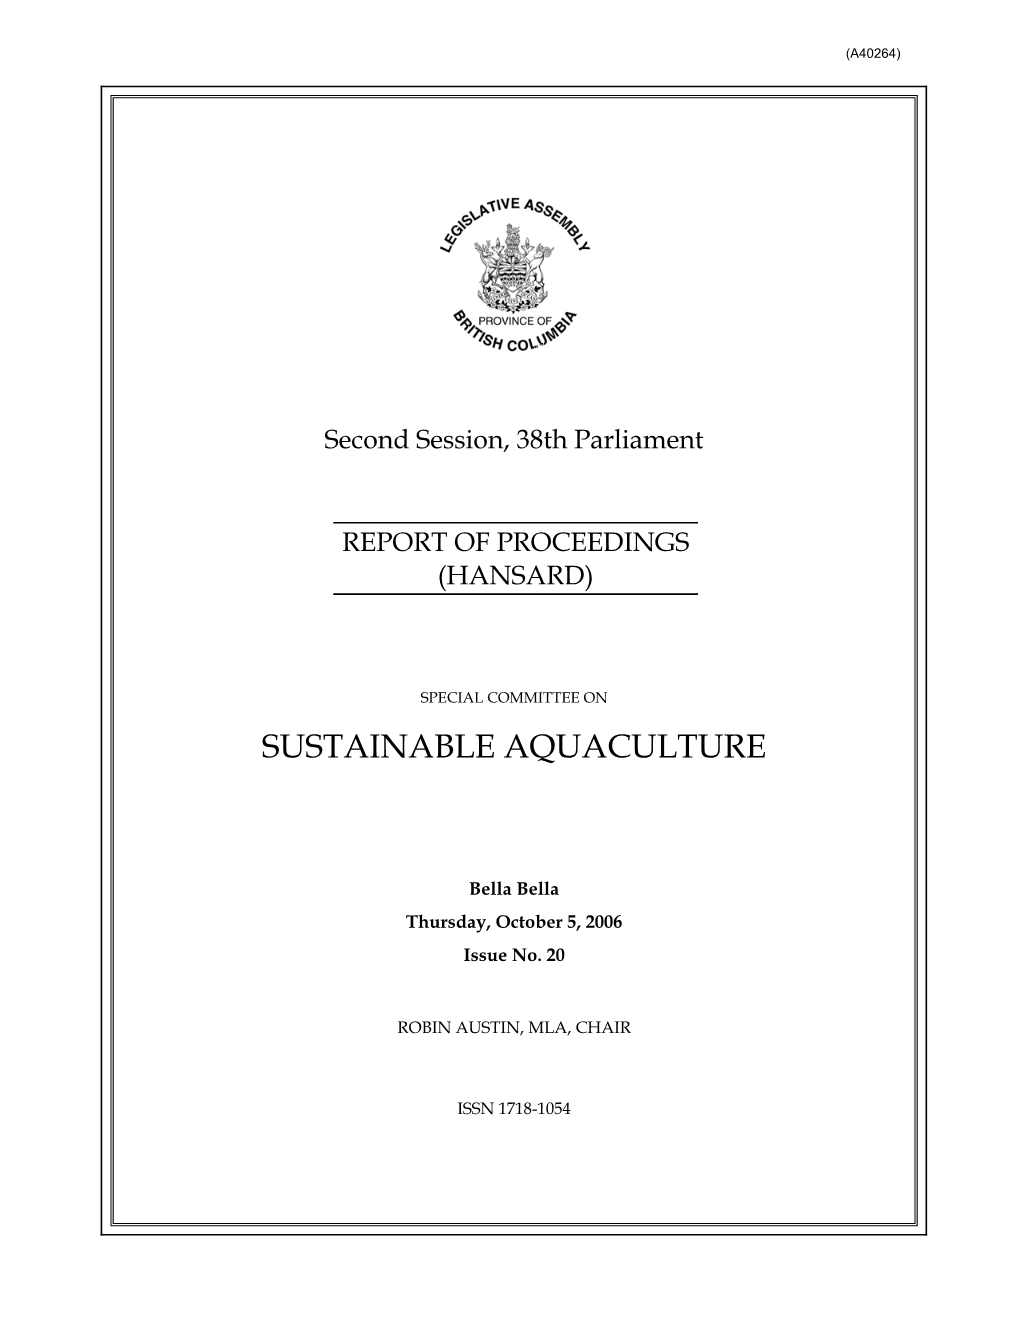 Sustainable Aquaculture — Thursday, October 5, 2006 A.M. — Issue No. 20